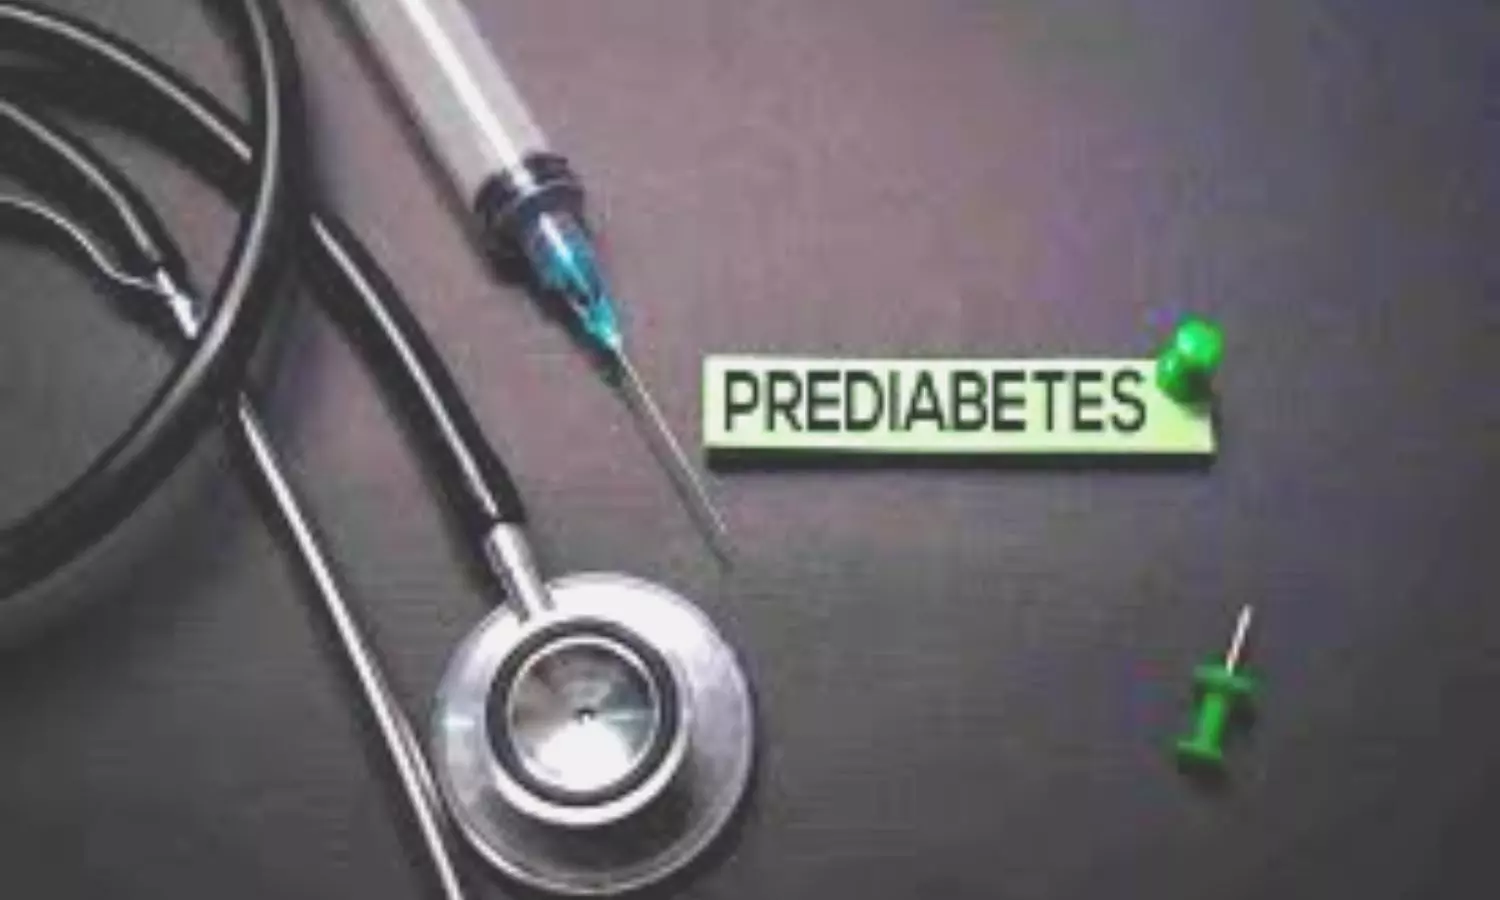 Management of prediabetes to prevent diabetes among Indians: Expert consensus